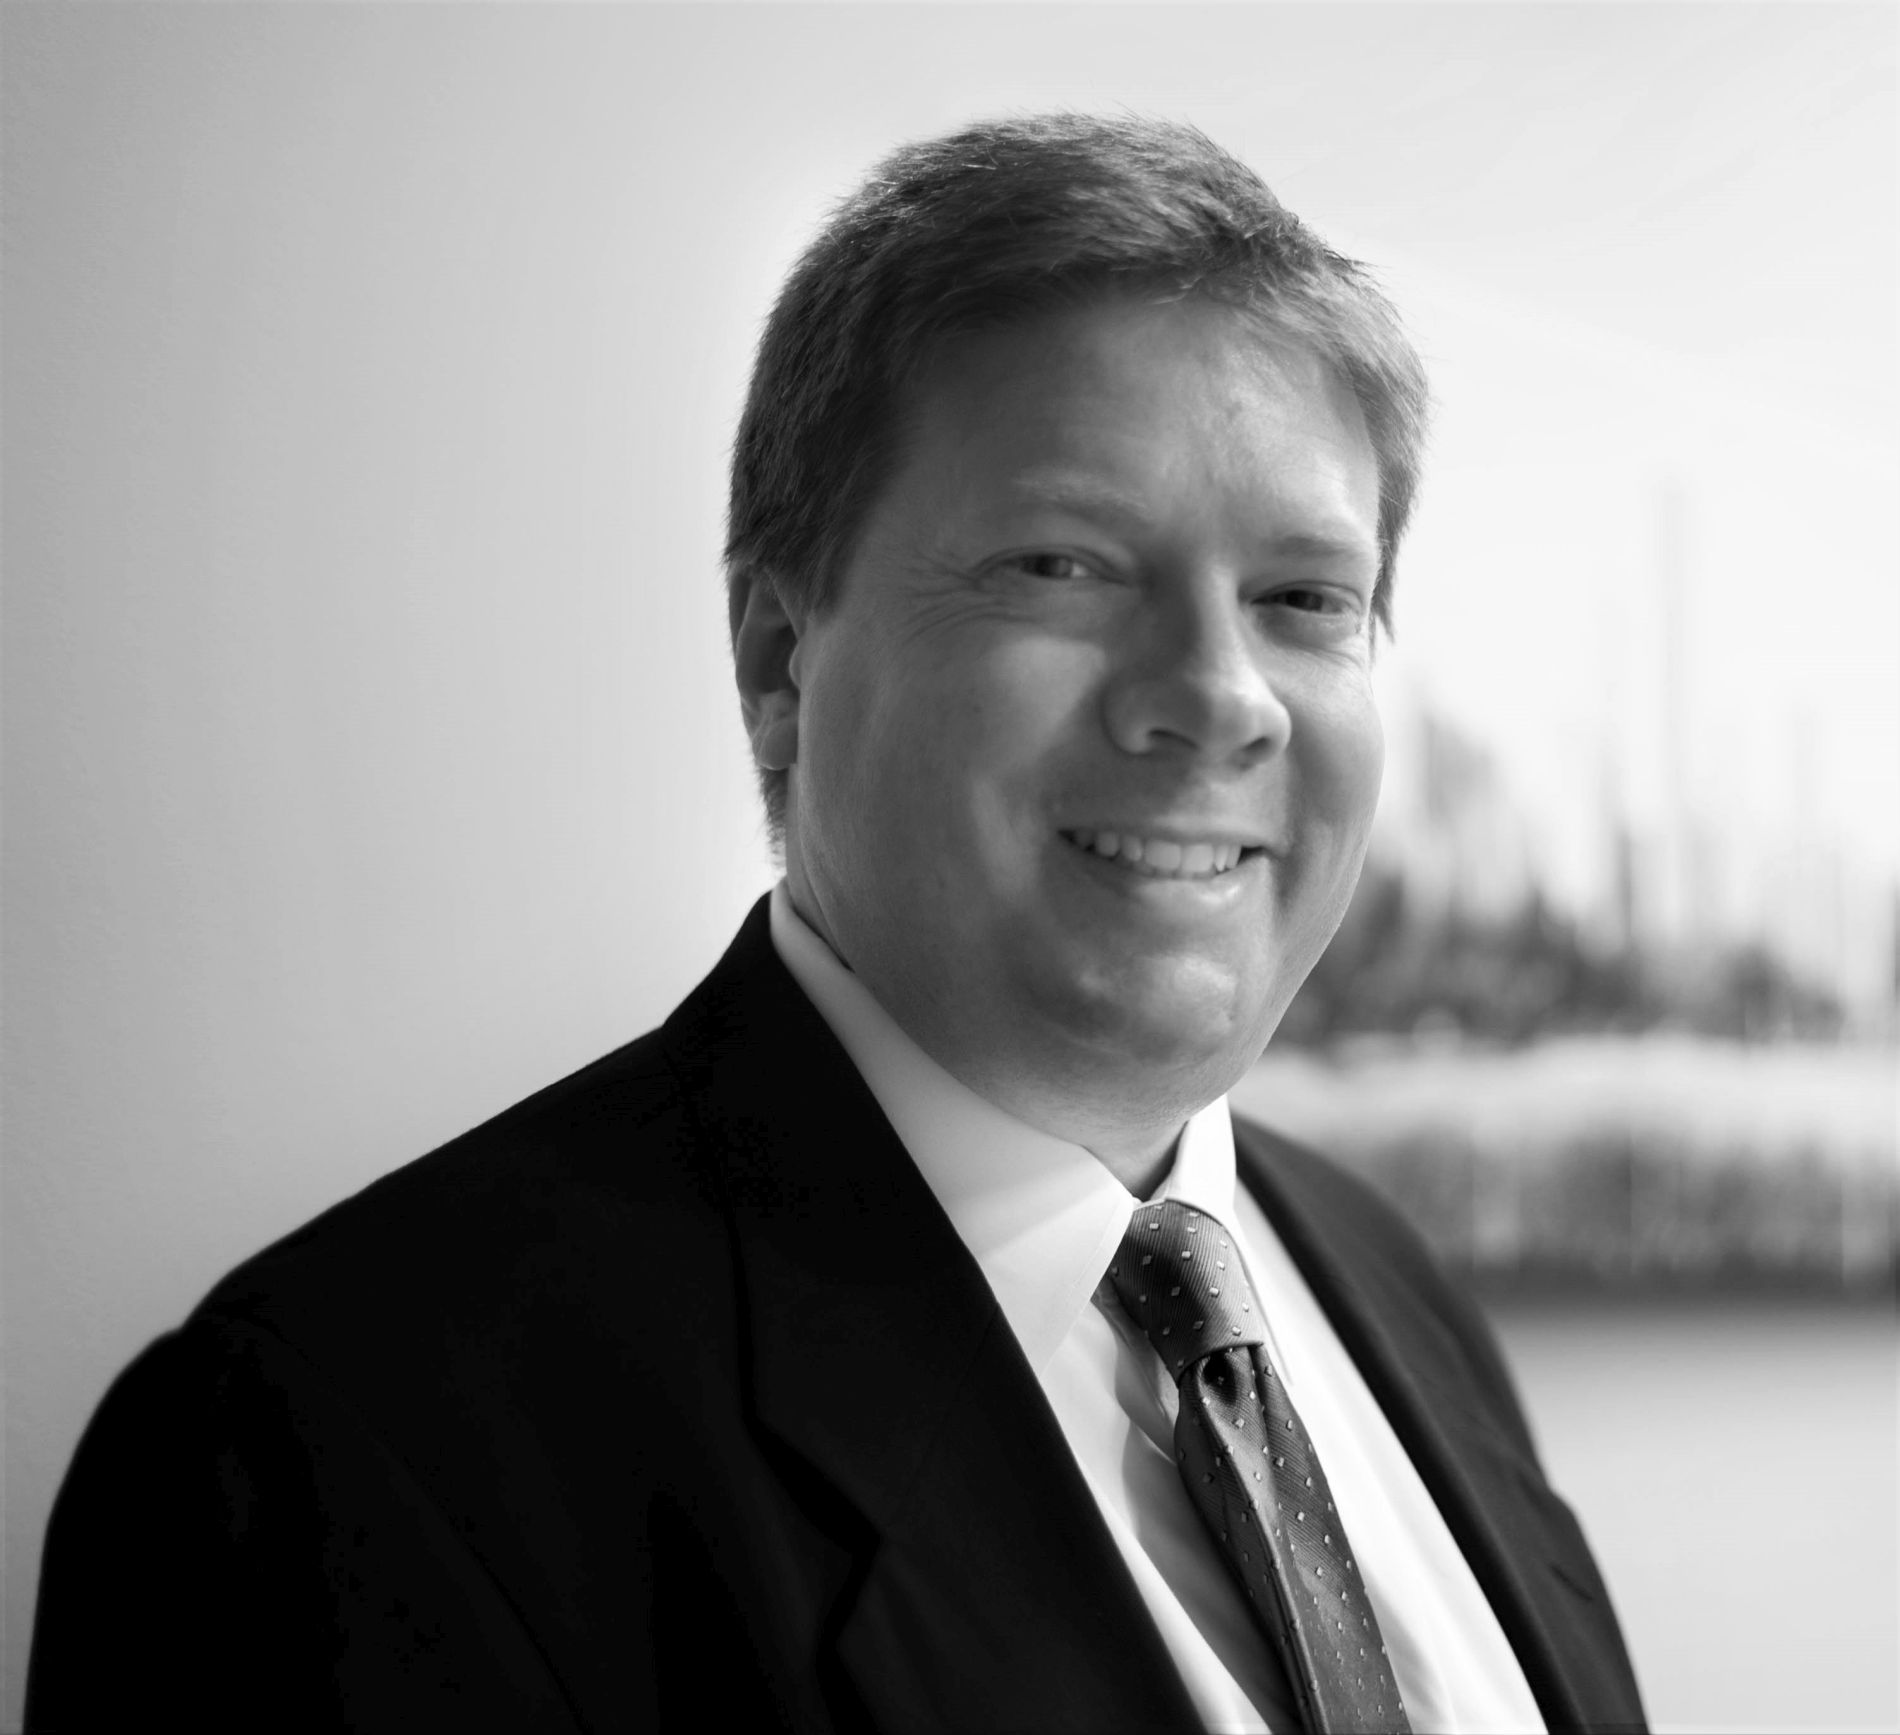 Randy Hughes is Co-Founder, Chief Investment Officer and Portfolio Manager of Ballast Equity Management 